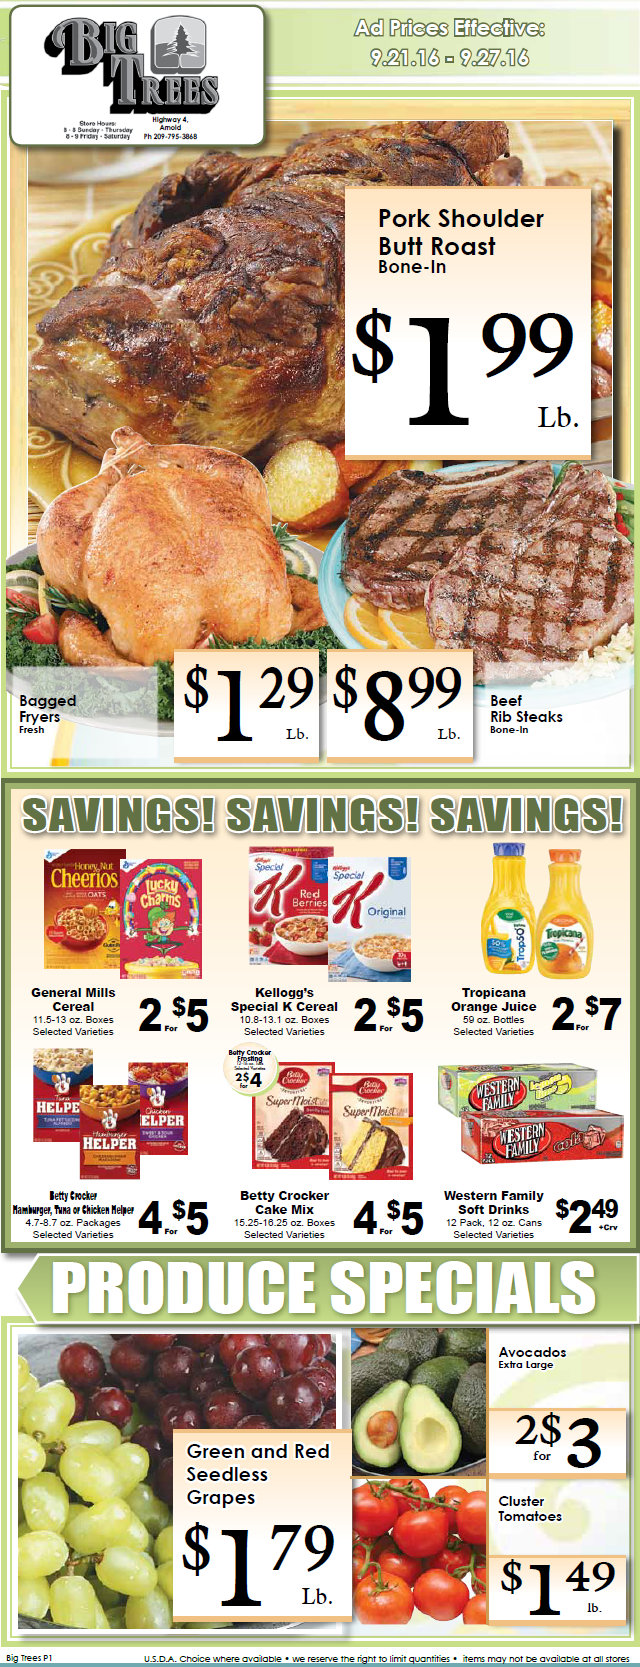 Big Trees Market Grocery Ad & Specials Through September 27th